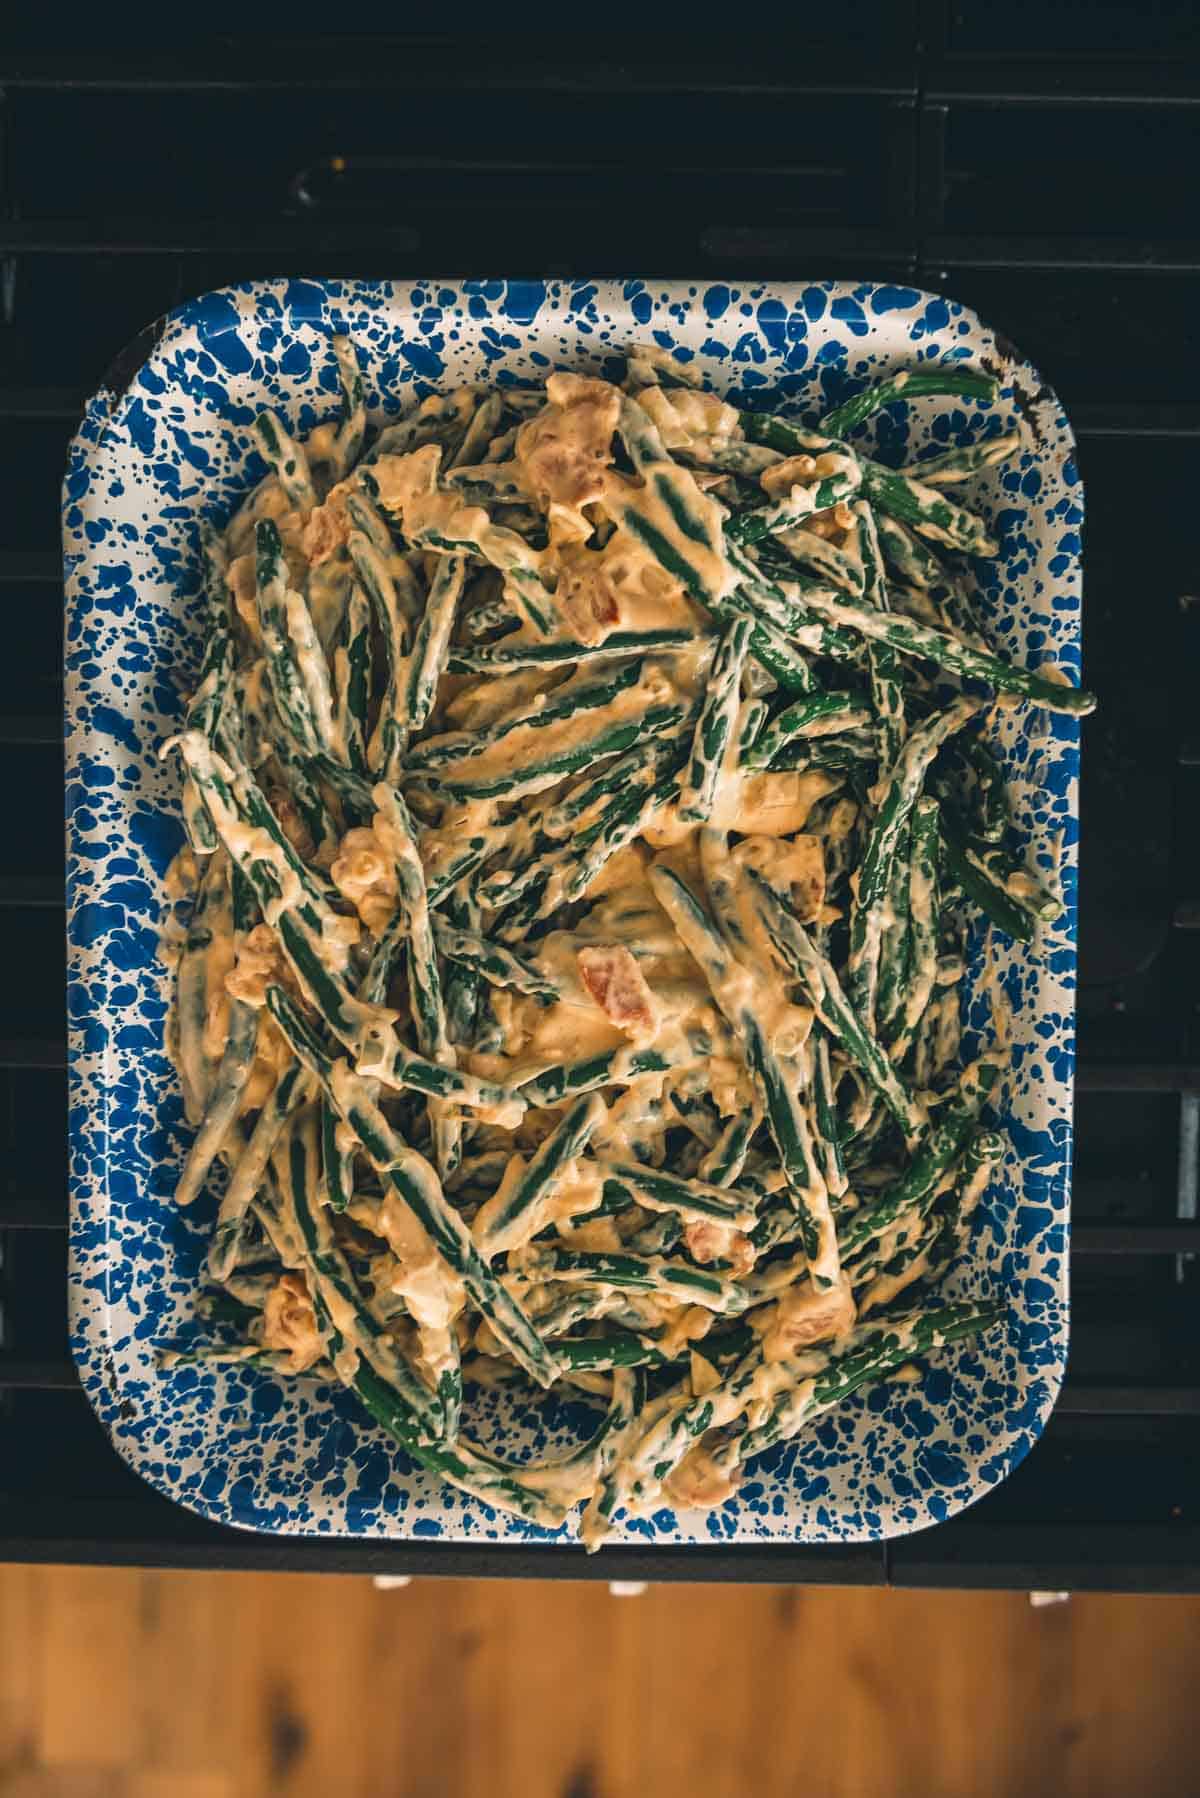 Green beans in a blue and white dish on a stove.